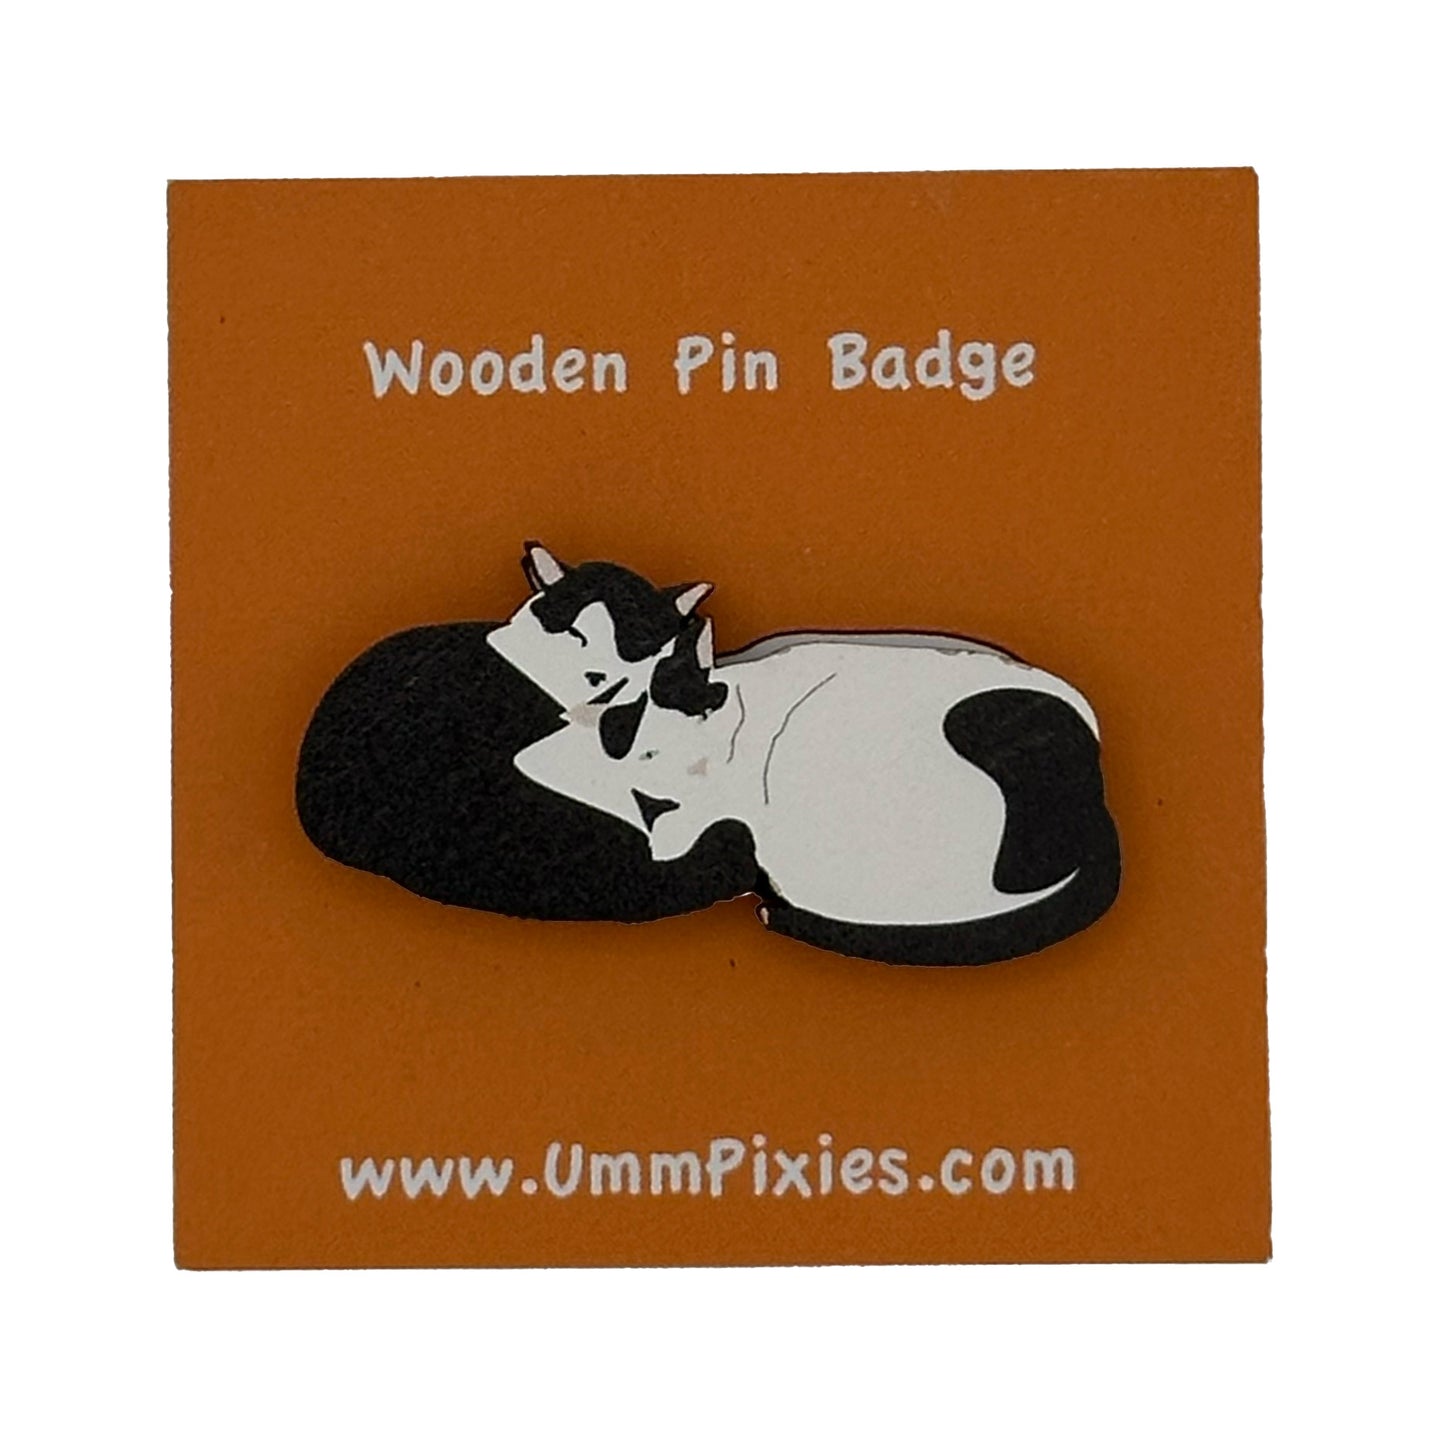 UmmPixies Curled Up Cats Wooden Pin Badge shown on display card